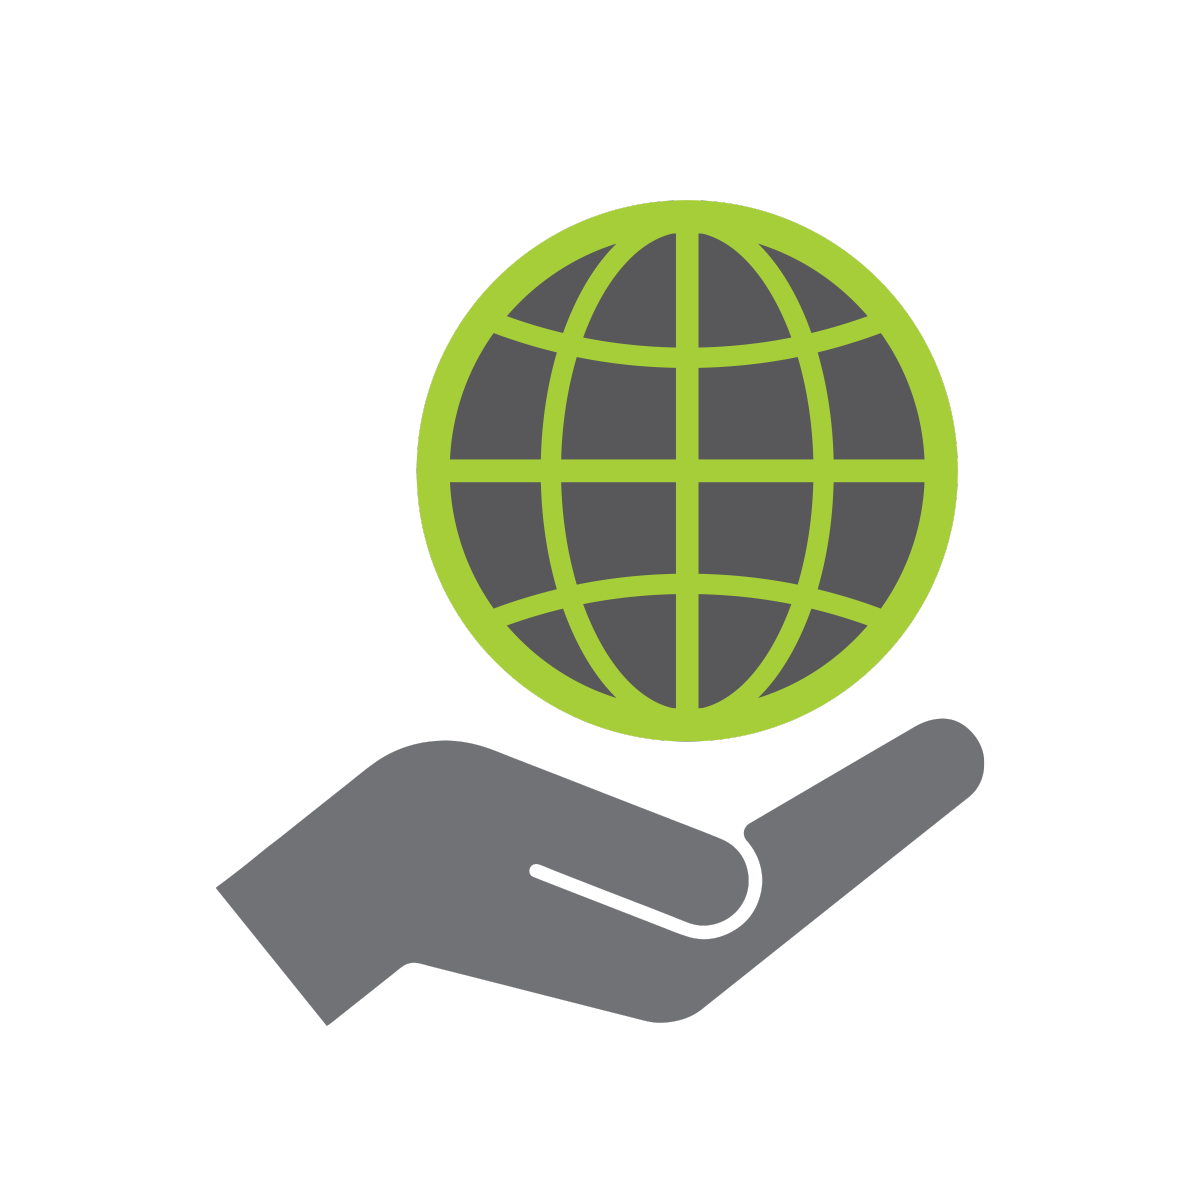 ORCID Trust image - hand holding a globe